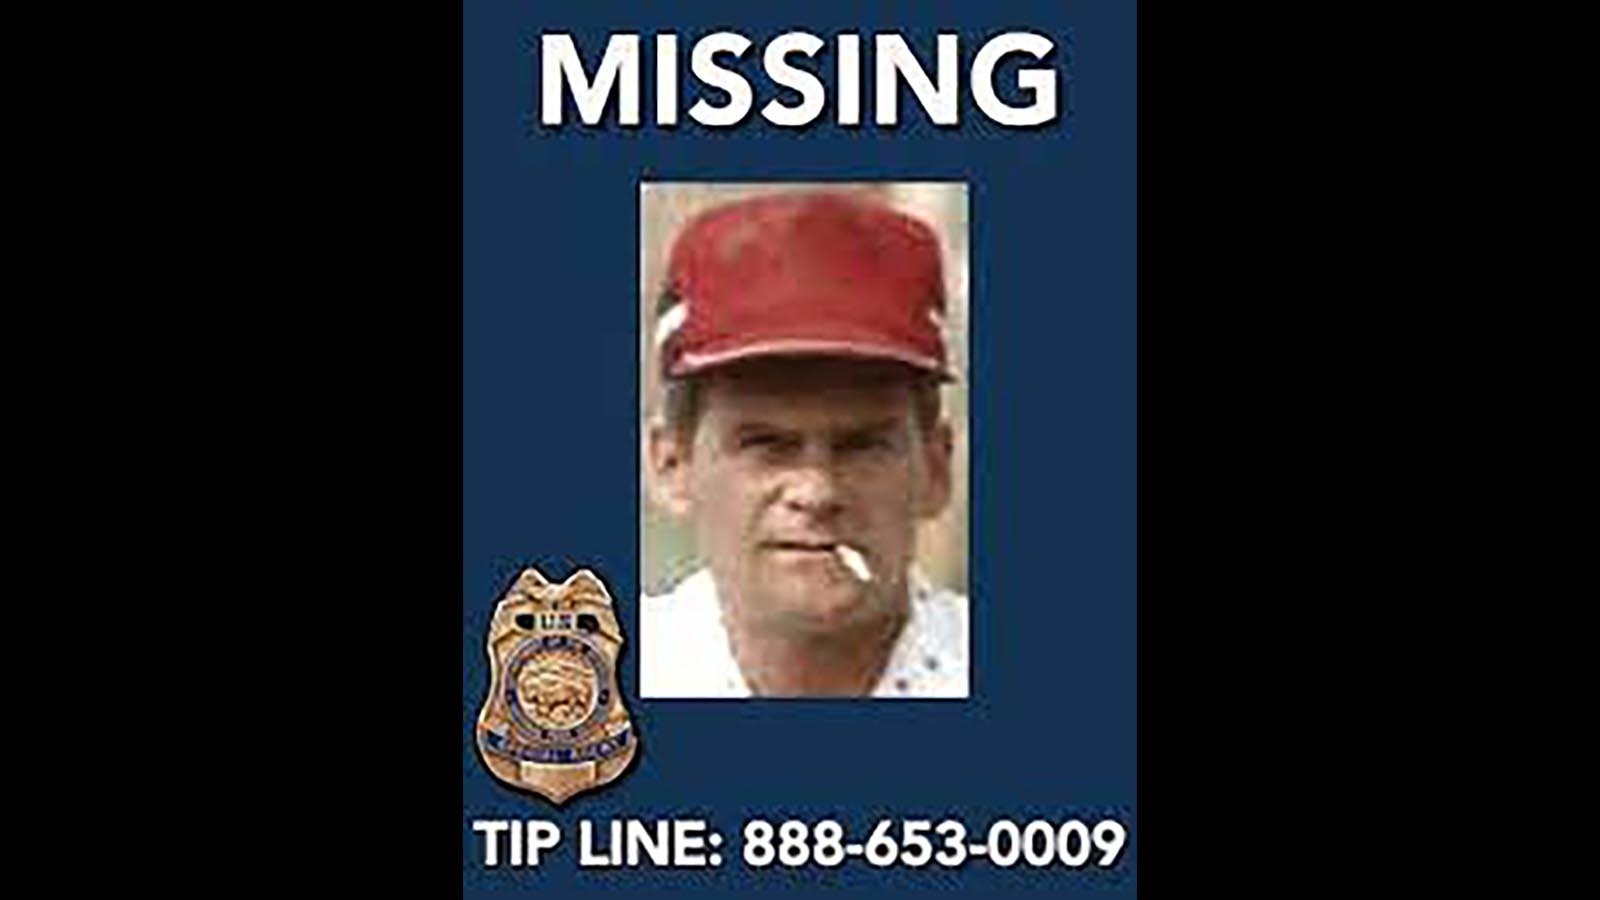 Dan Campbell, 42, went missing April 8, 1991, while hunting for shed antlers in Yellowstone National Park.